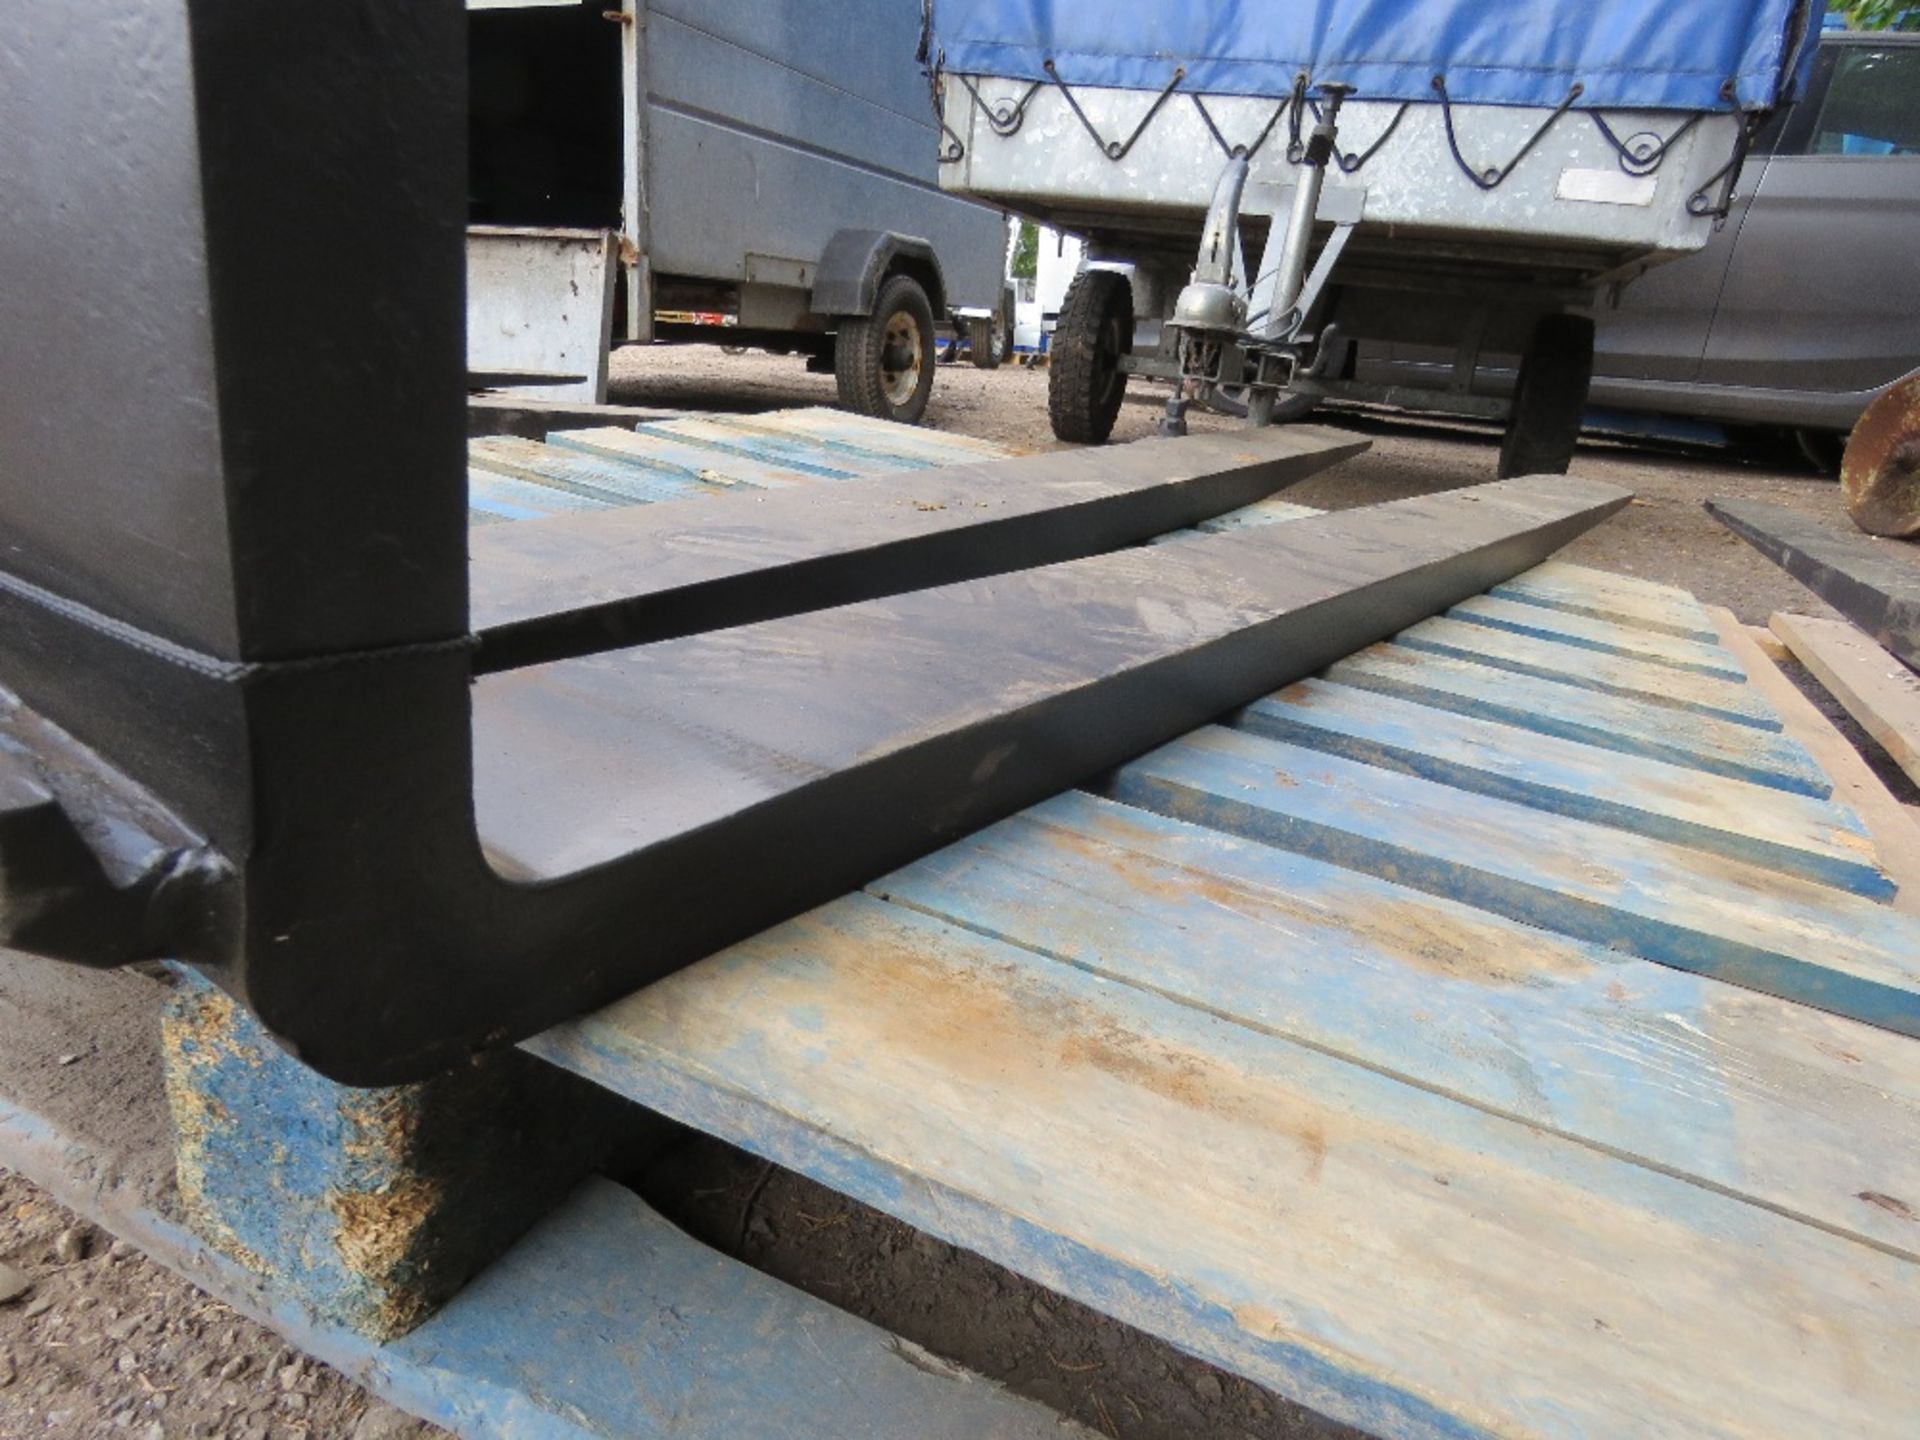 PAIR OF USED FORKLIFT TINES, 20" CARRIAGE, 1.8M LENGTH APPROX. - Image 3 of 3